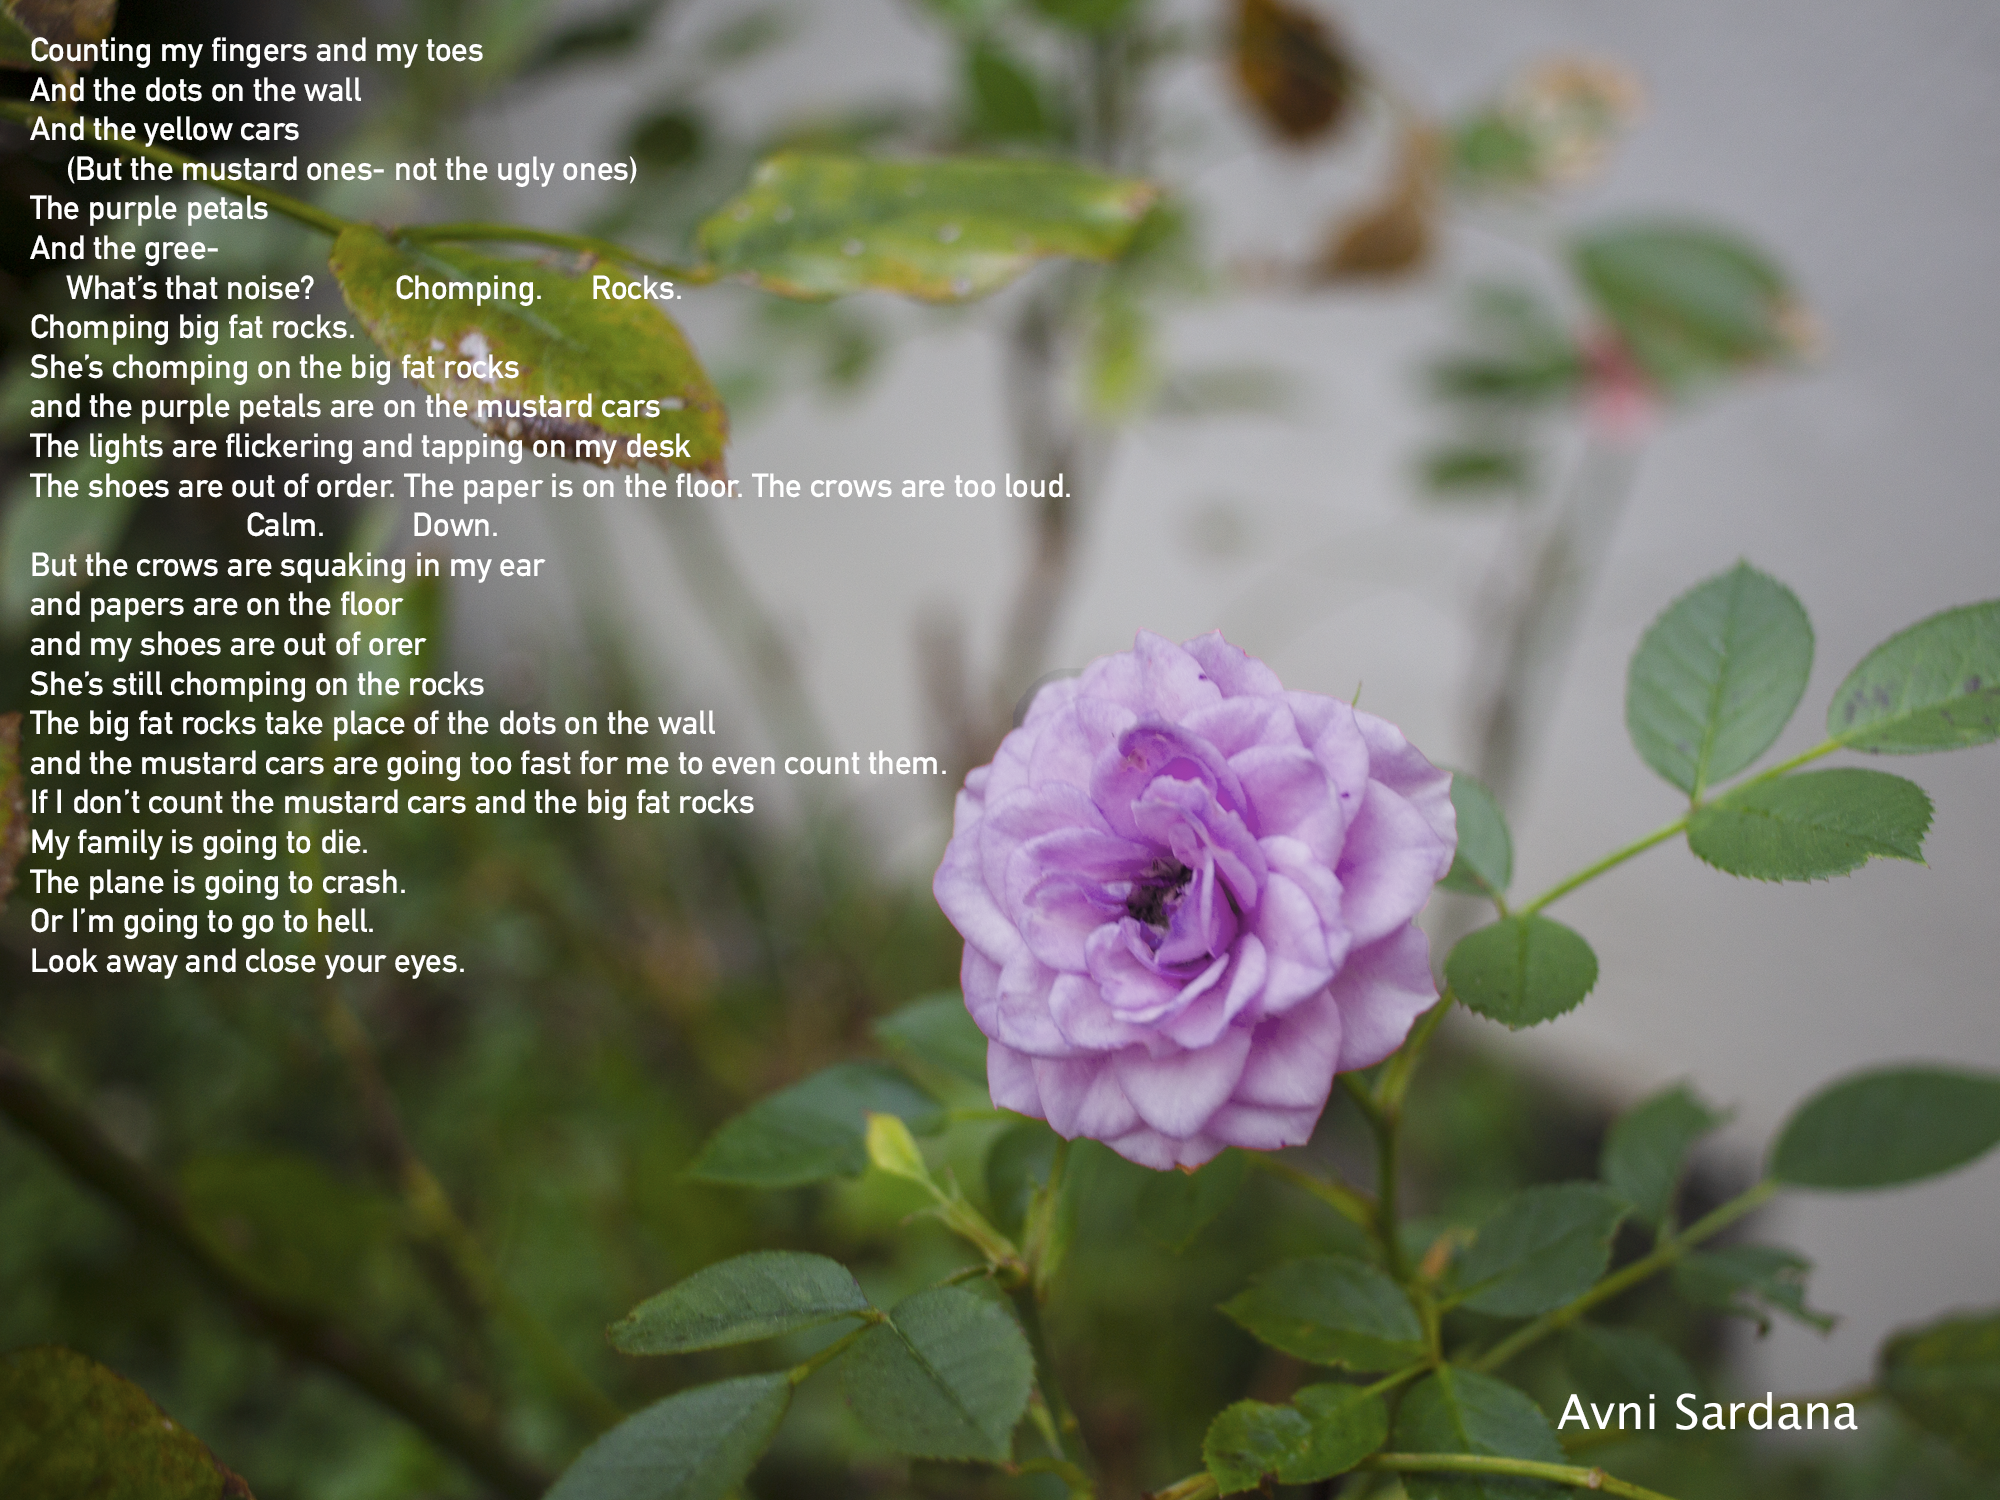 Poem by Avni Sardana Counting is Not for Kids